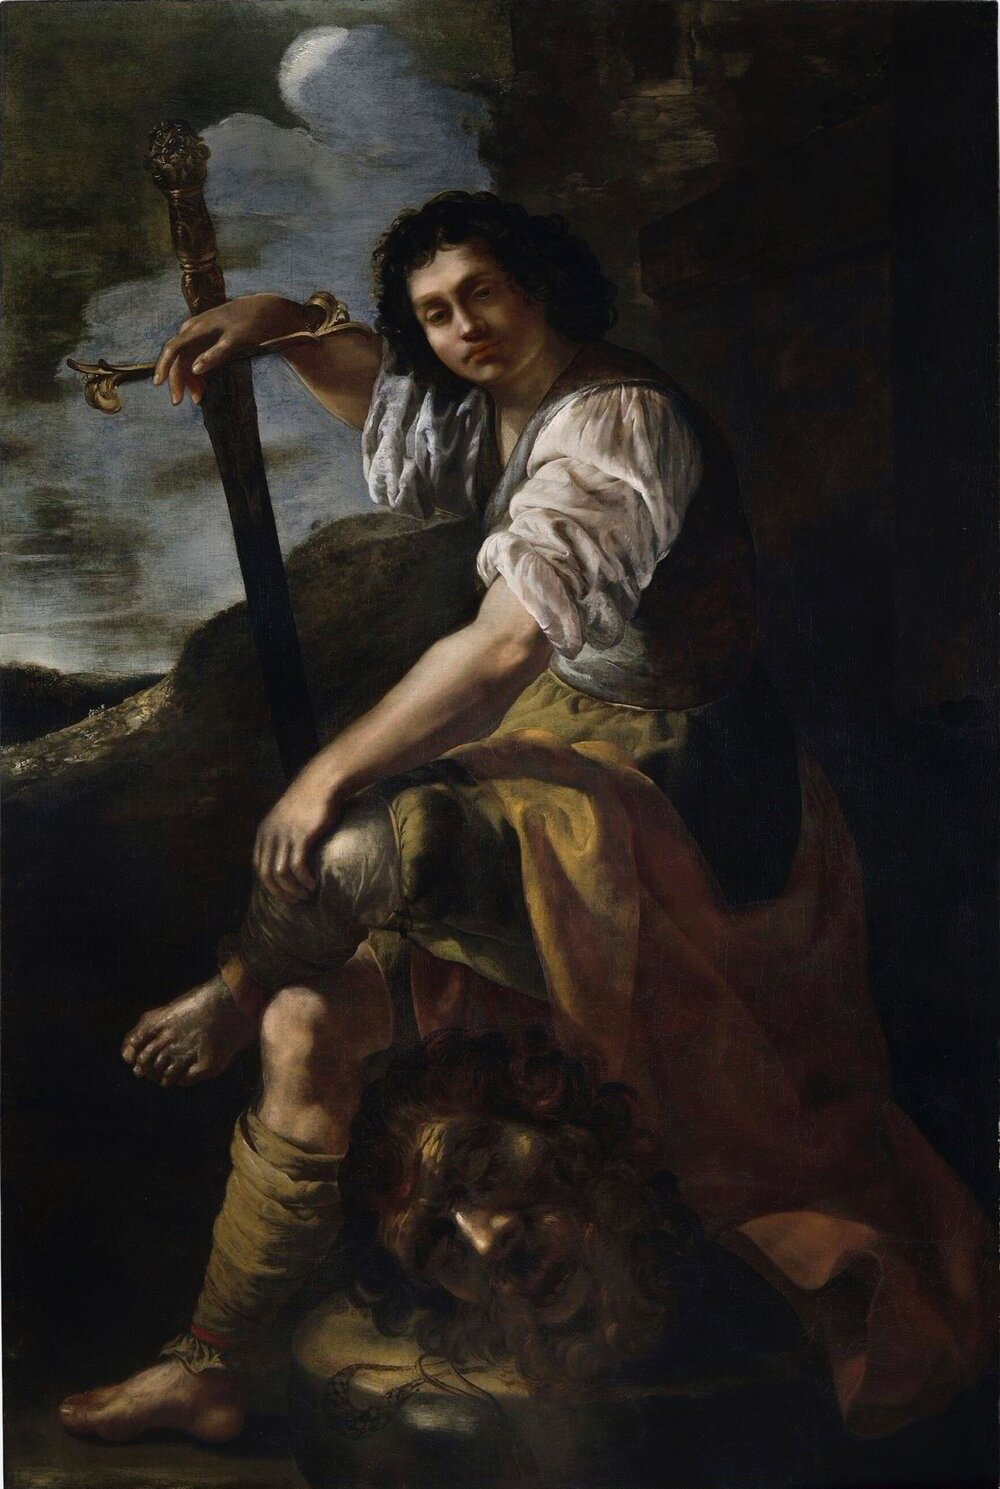 A young man sits on the head of the giant he has killed, with his ankle crossed over his knee. He wears an ambiguous classical costume and rests his right hand on a sword. He looks directly at the viewer with confidence.